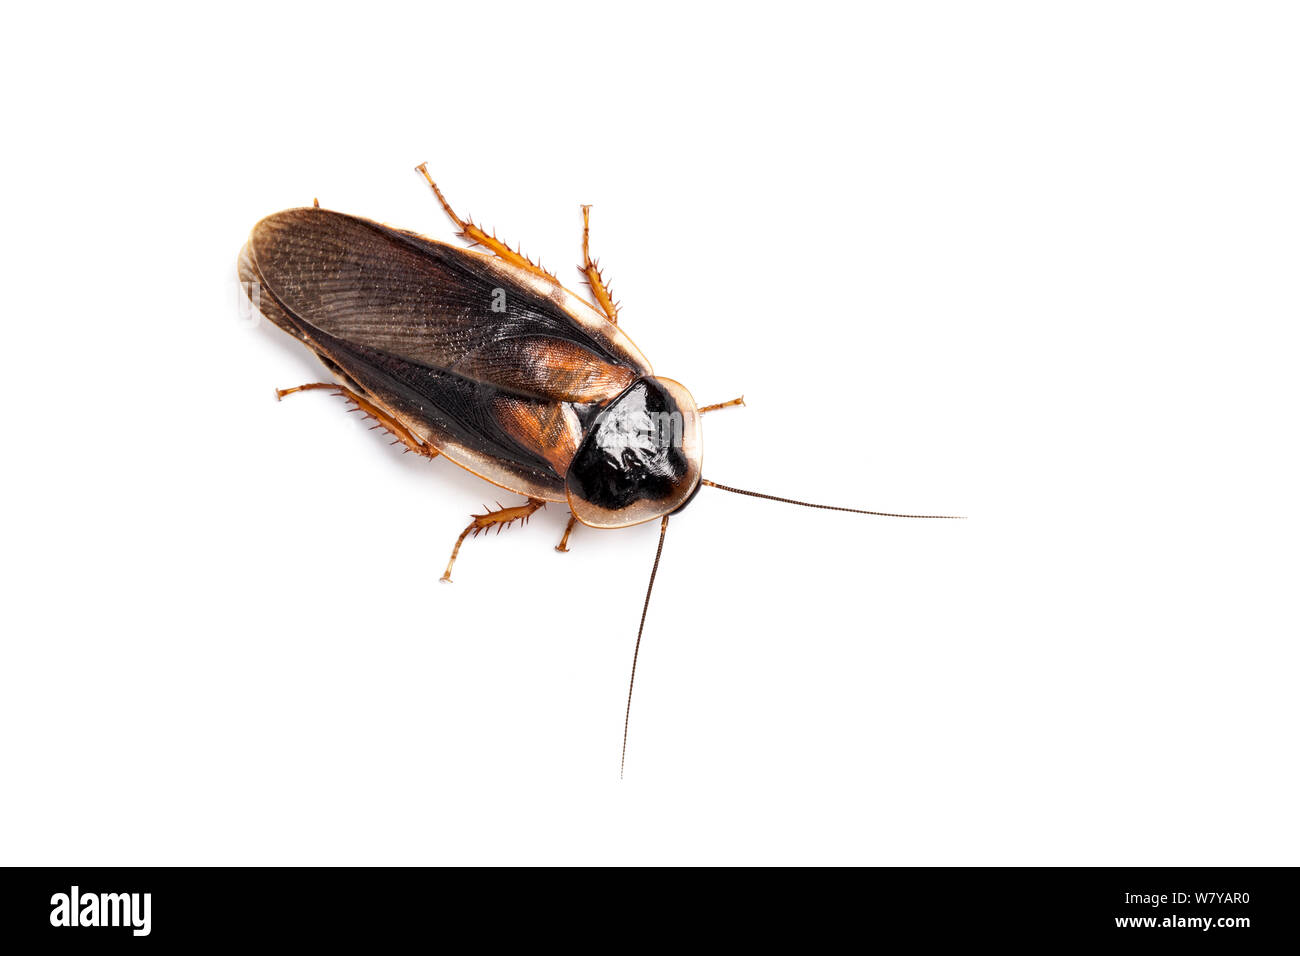 Orange-spotted cockroach (Blaptica dubia) on white background, occurs in Central and South America. Stock Photo